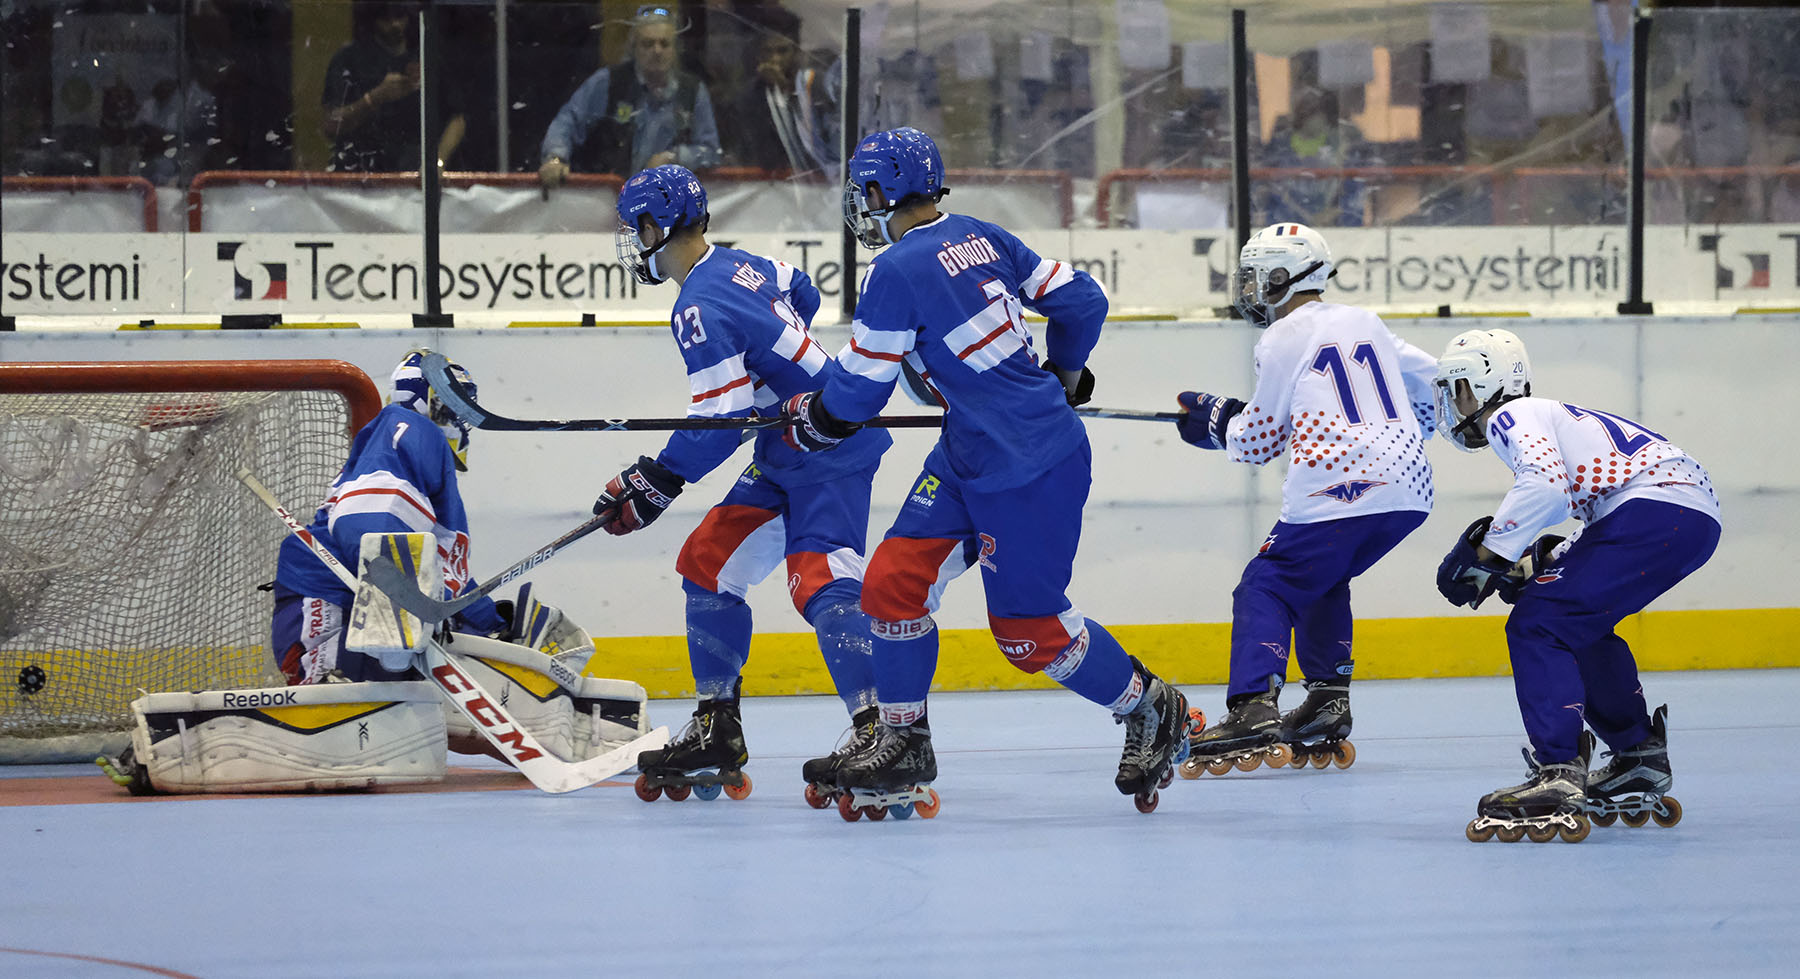 12-facts-about-world-inline-hockey-championships